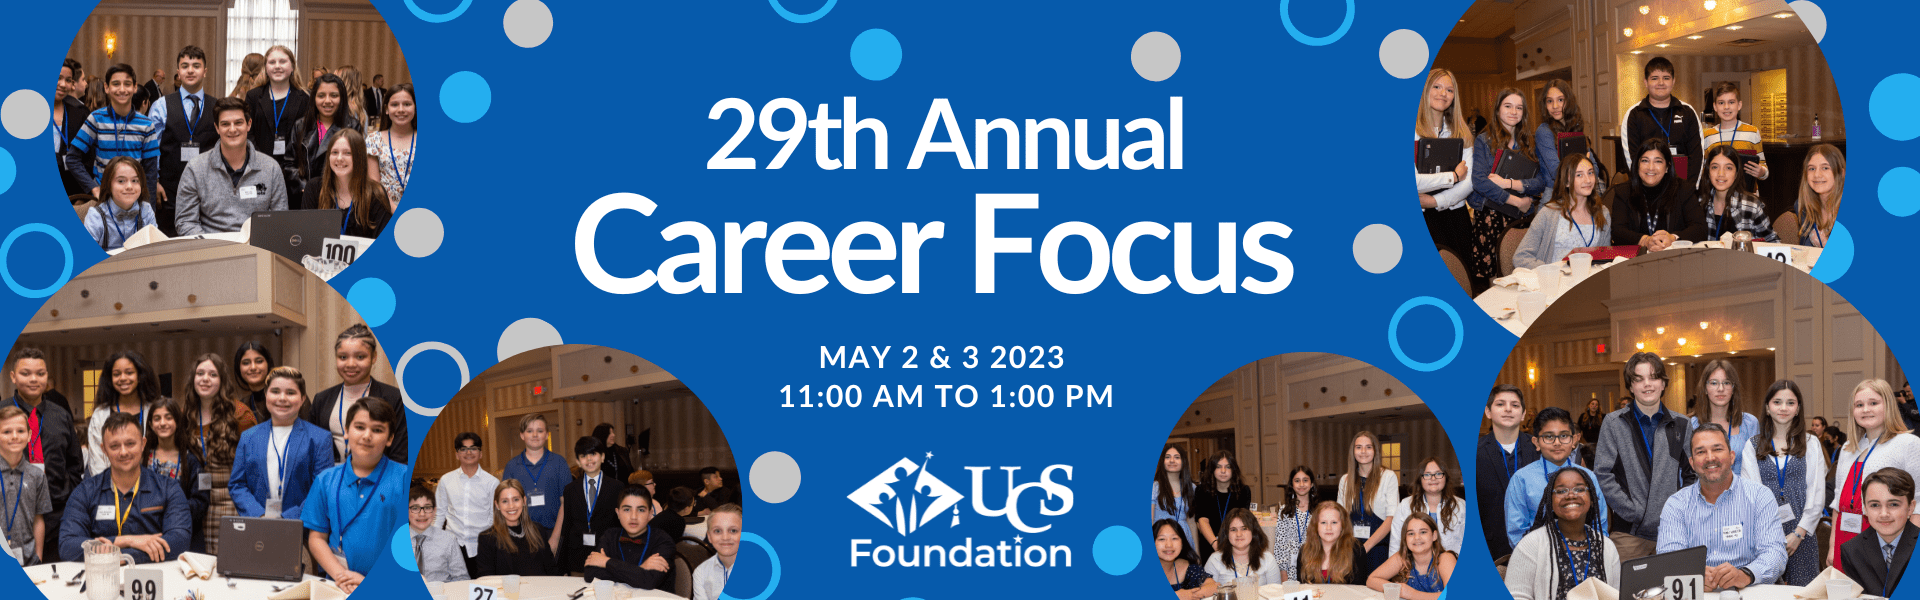 29th annual career focus may 2 & 3 from 11 to 1 PM UCS Foundation